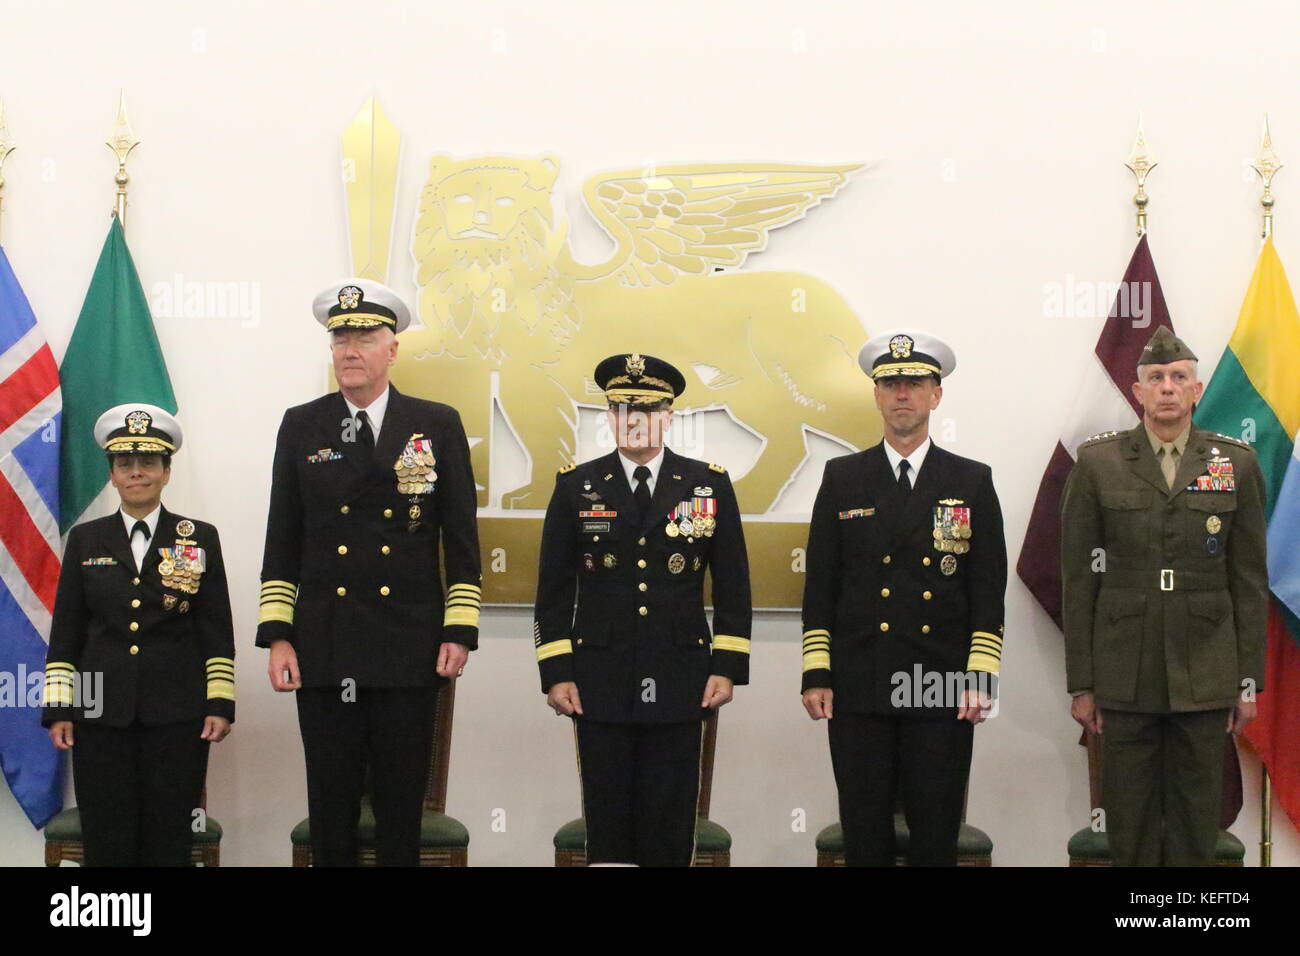 Giugliano In Campania, Italy. 20th Oct, 2017. Military Ceremony 'Command Exchange' at JFC Naples Headquarters. In picture in order L to R: Admiral Michelle J.Howard, Admiral James G. Foggo III, General Curtis M. Scaparrotti, Admiral John M. Richardson, General Thomas D. Waldhauser Military Ceremony 'Command Exchange' at JFC Naples Headquarters. Credit: Salvatore Esposito/Pacific Press/Alamy Live News Stock Photo